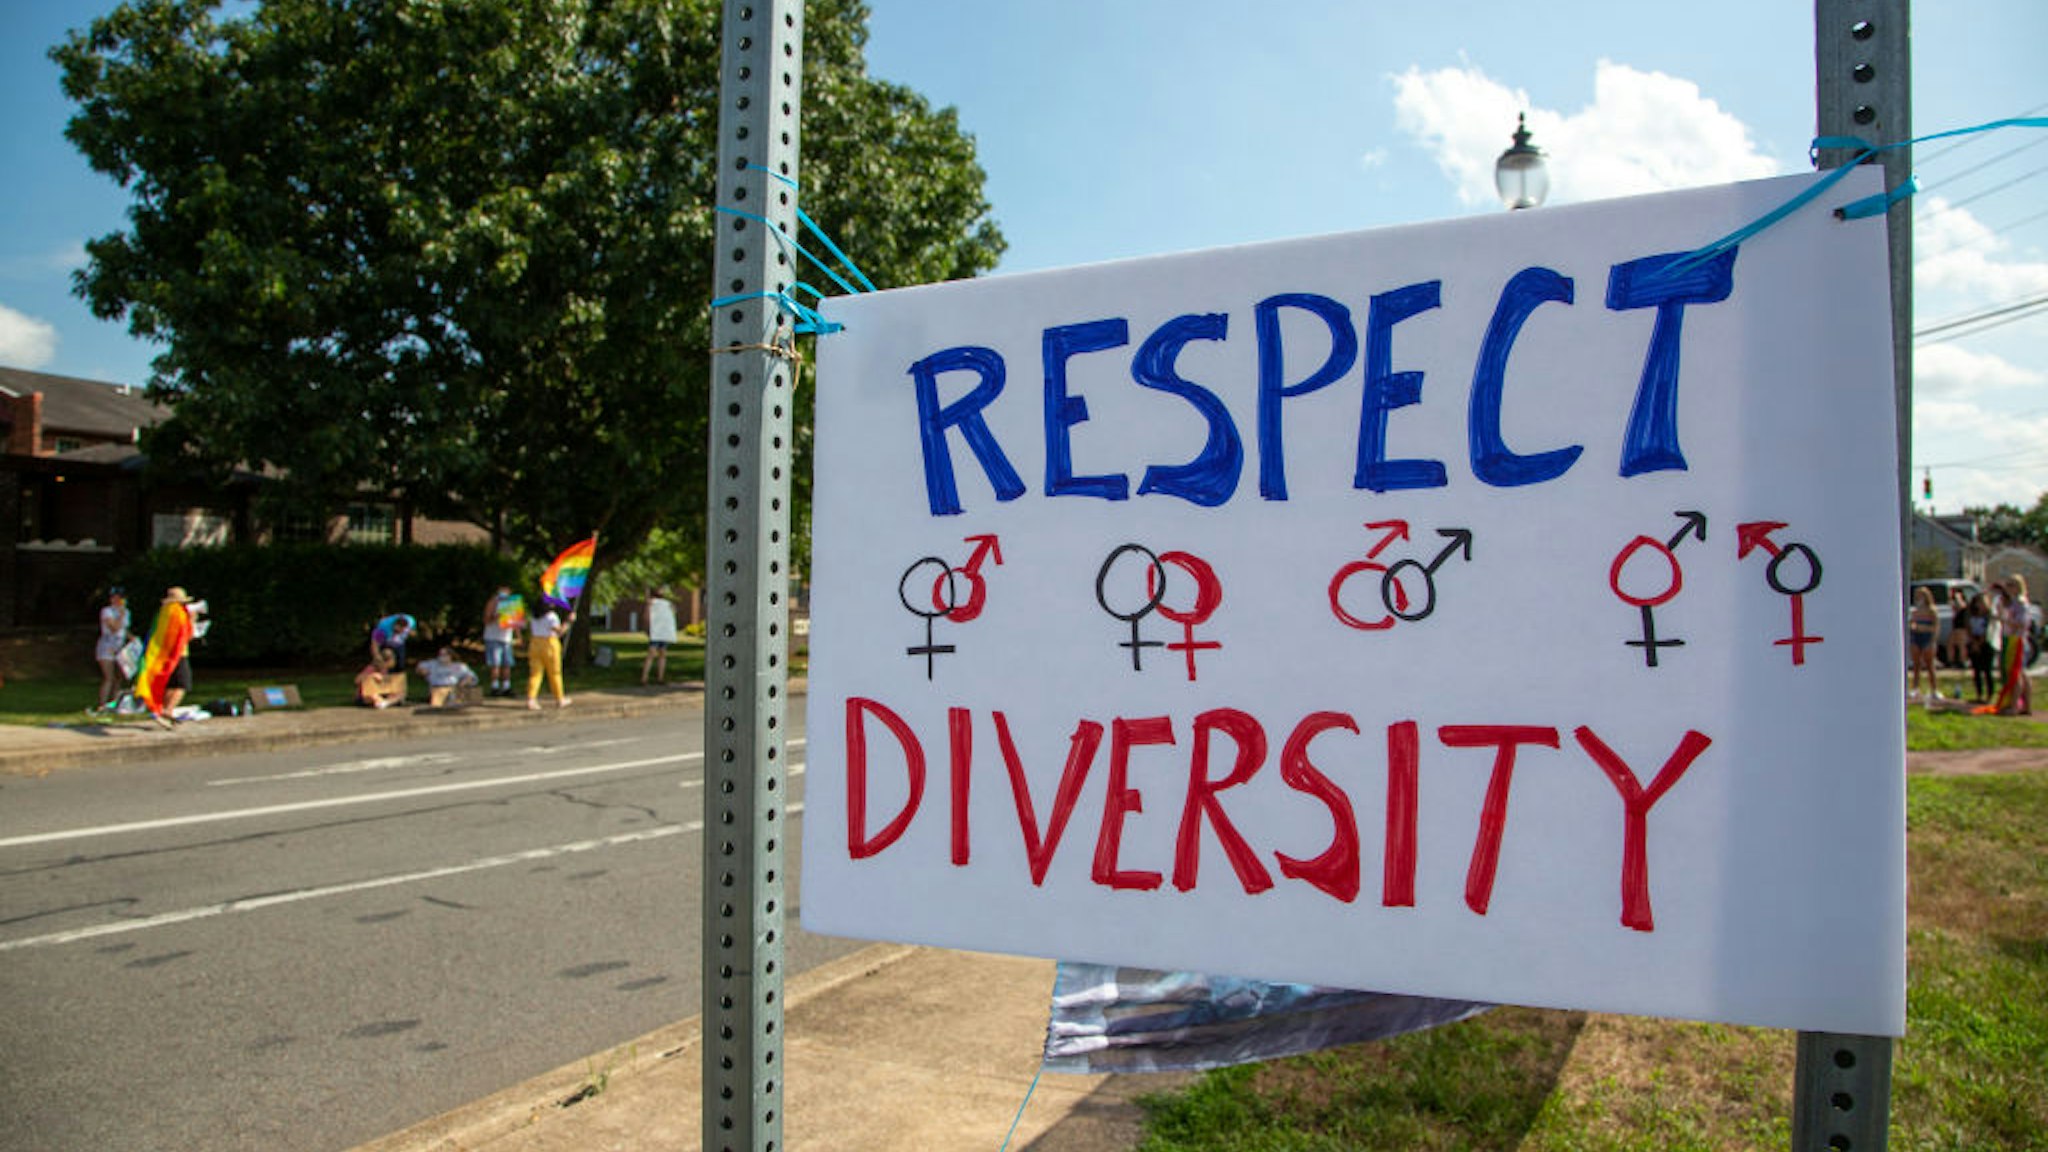 MILTON, PA, UNITED STATES - 2020/08/08: About 100 people participated in a Pride Rally in Milton, Pennsylvania on August 8, 2020. The I Am Alliance organized the event after an area grocery store posted an anti-mask sign which blamed the LGBTQ community for spreading COVID-19.